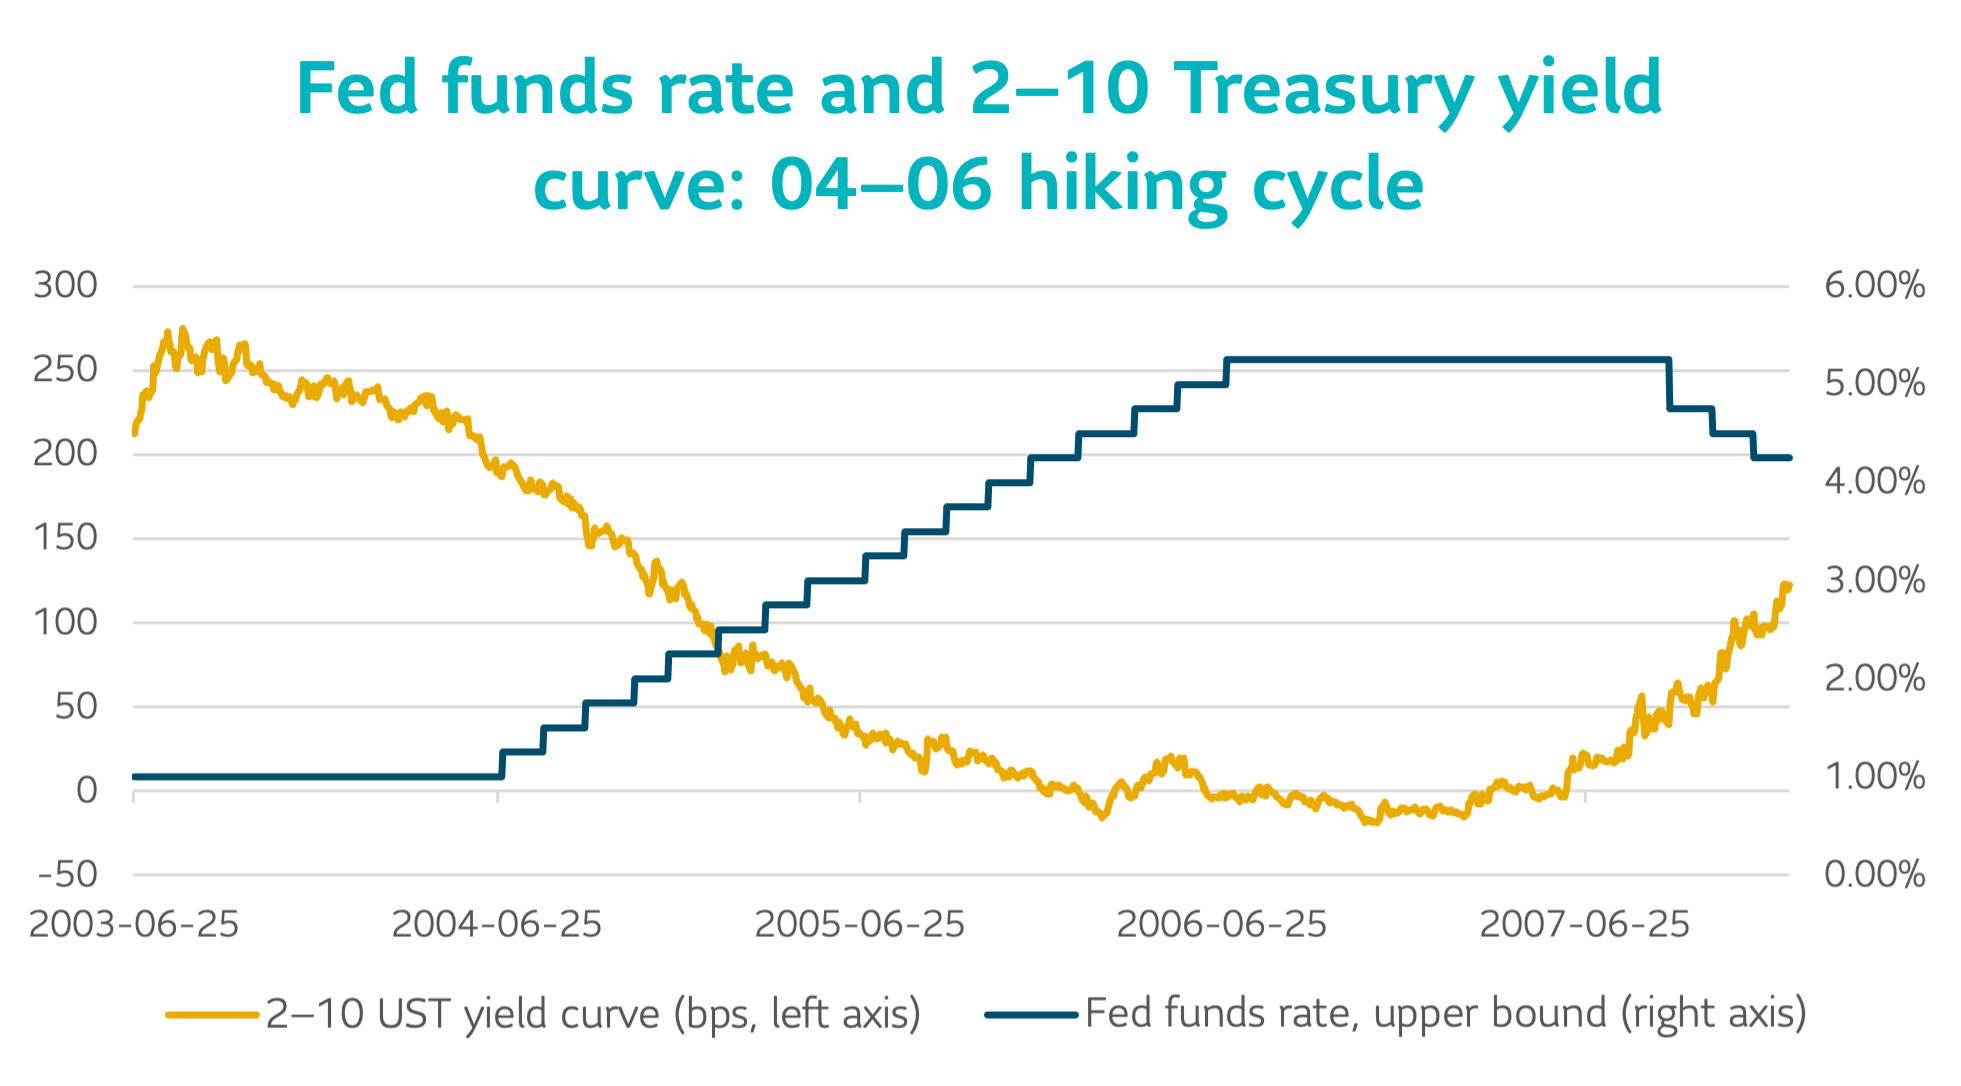 Fed funds rate and 2-10 Treasury yield curve: 05-06 hiking cycle